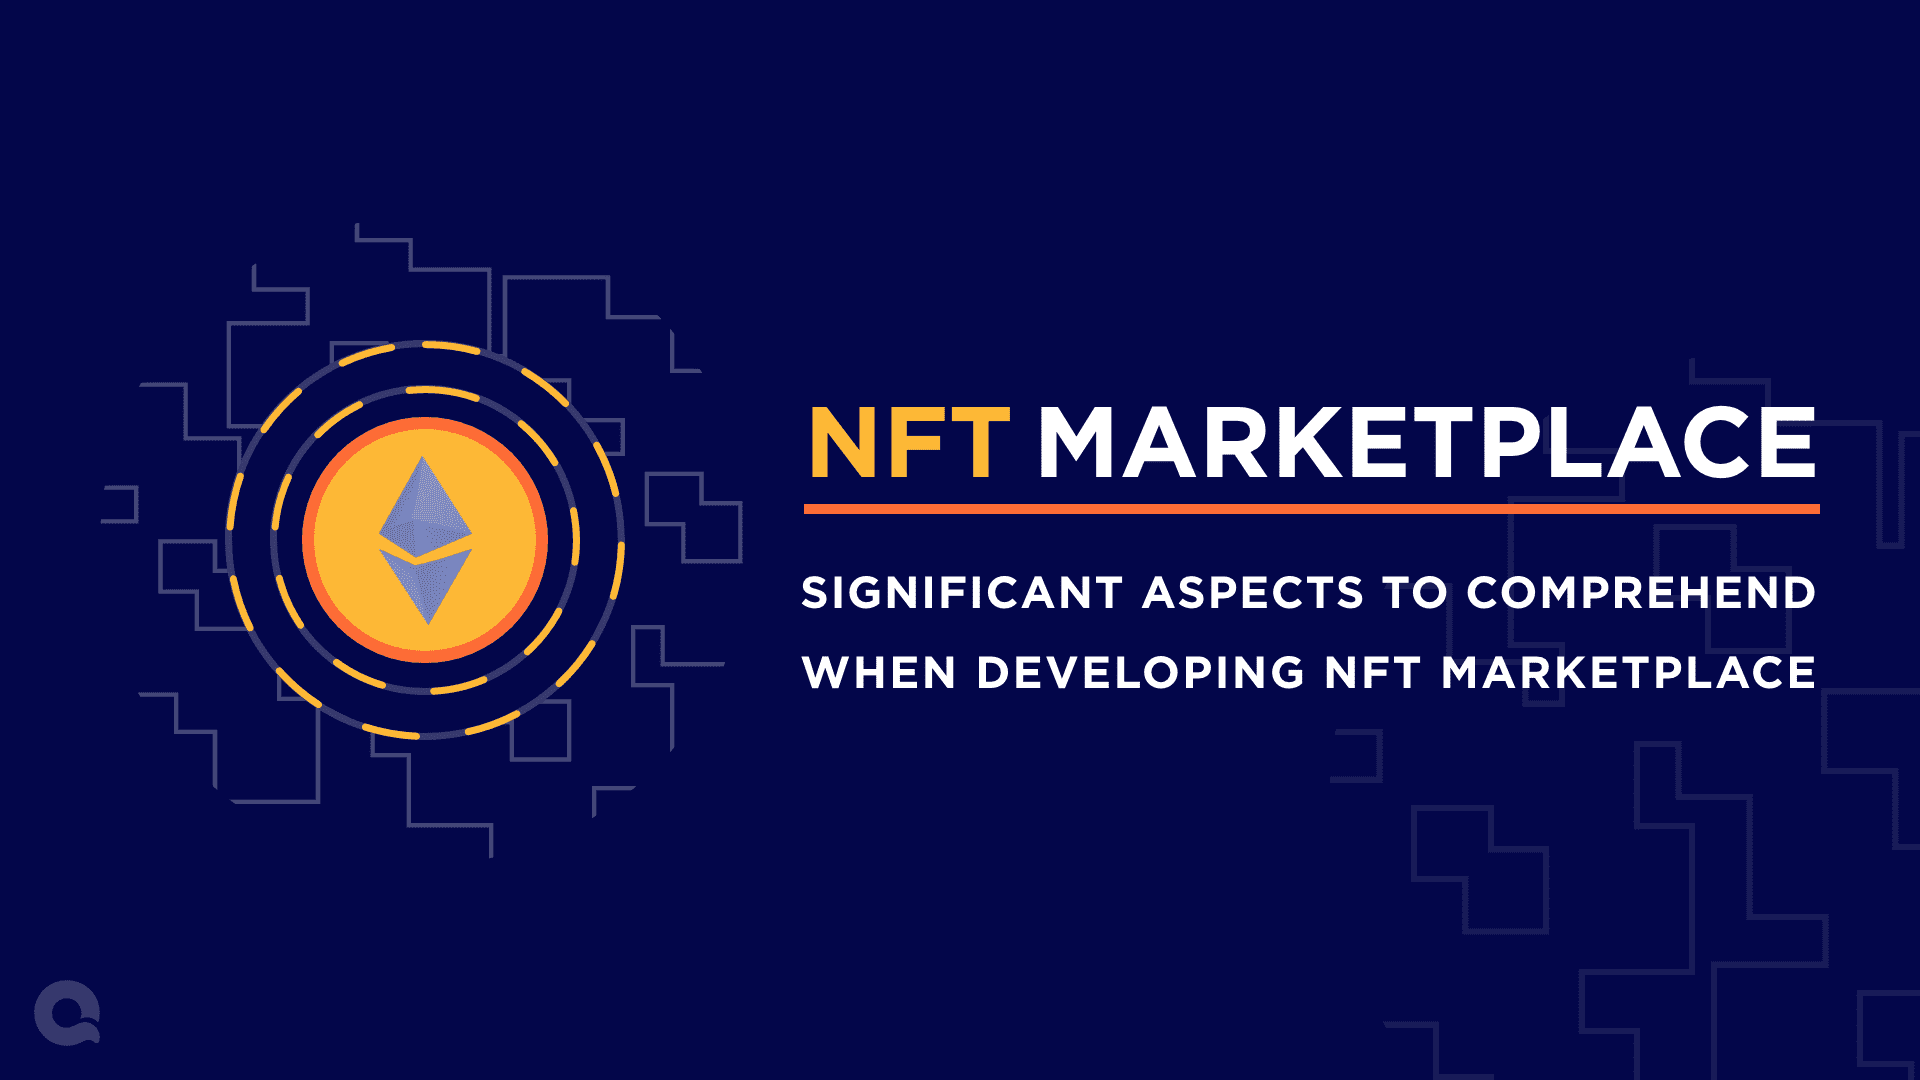 Significant Aspects to Comprehend When Developing NFT Marketplace